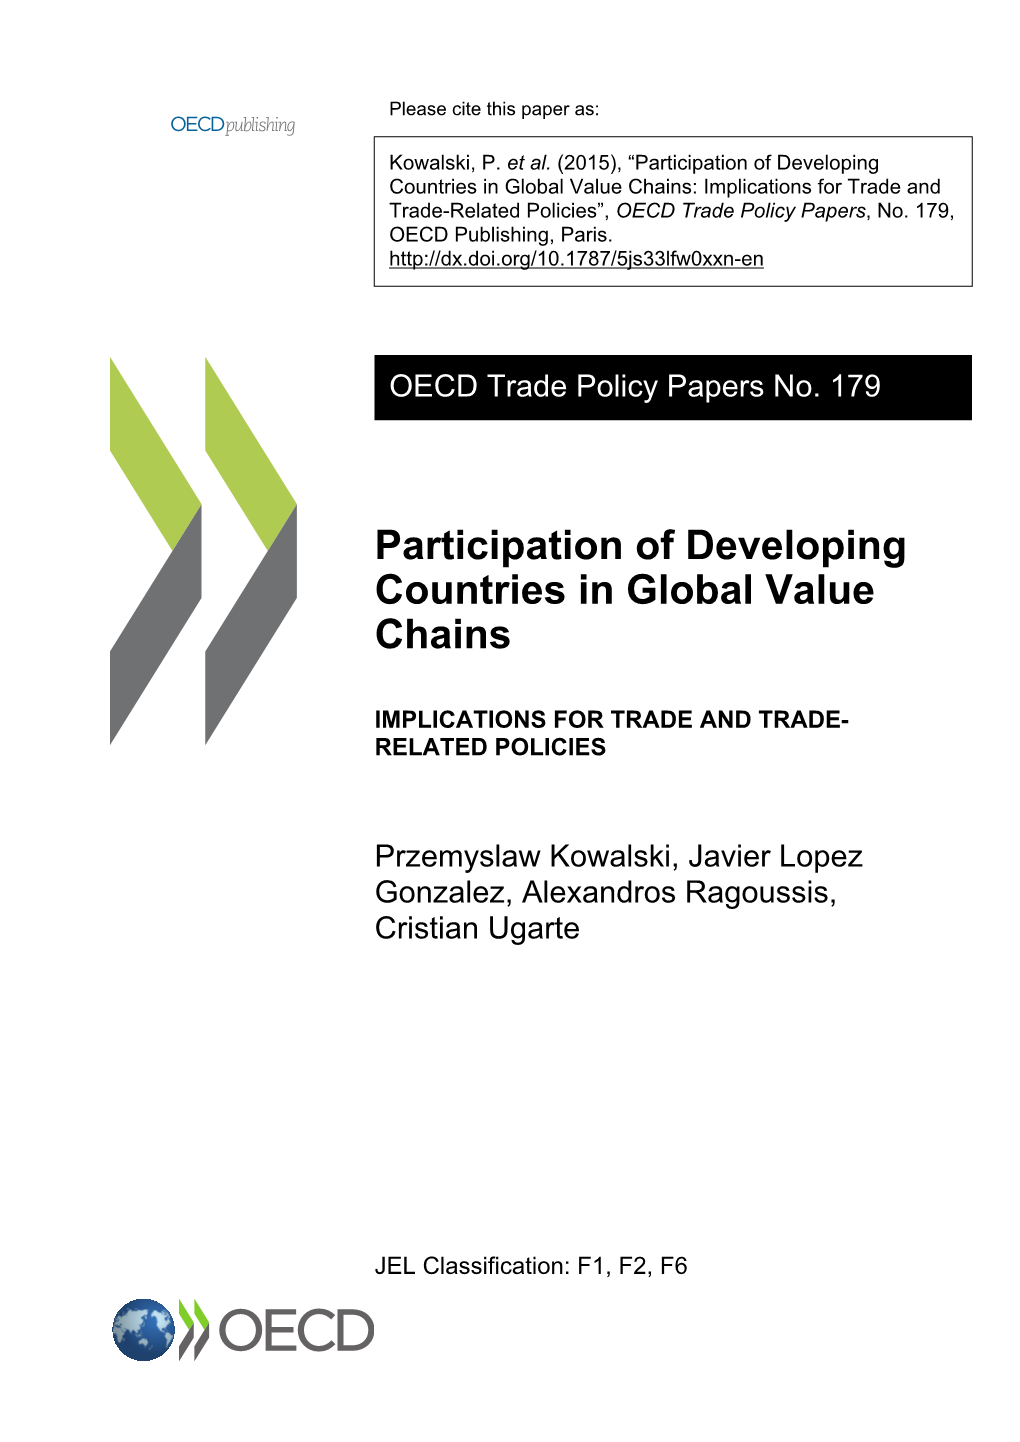 Participation of Developing Countries in Global Value Chains: Implications for Trade and Trade-Related Policies”, OECD Trade Policy Papers, No